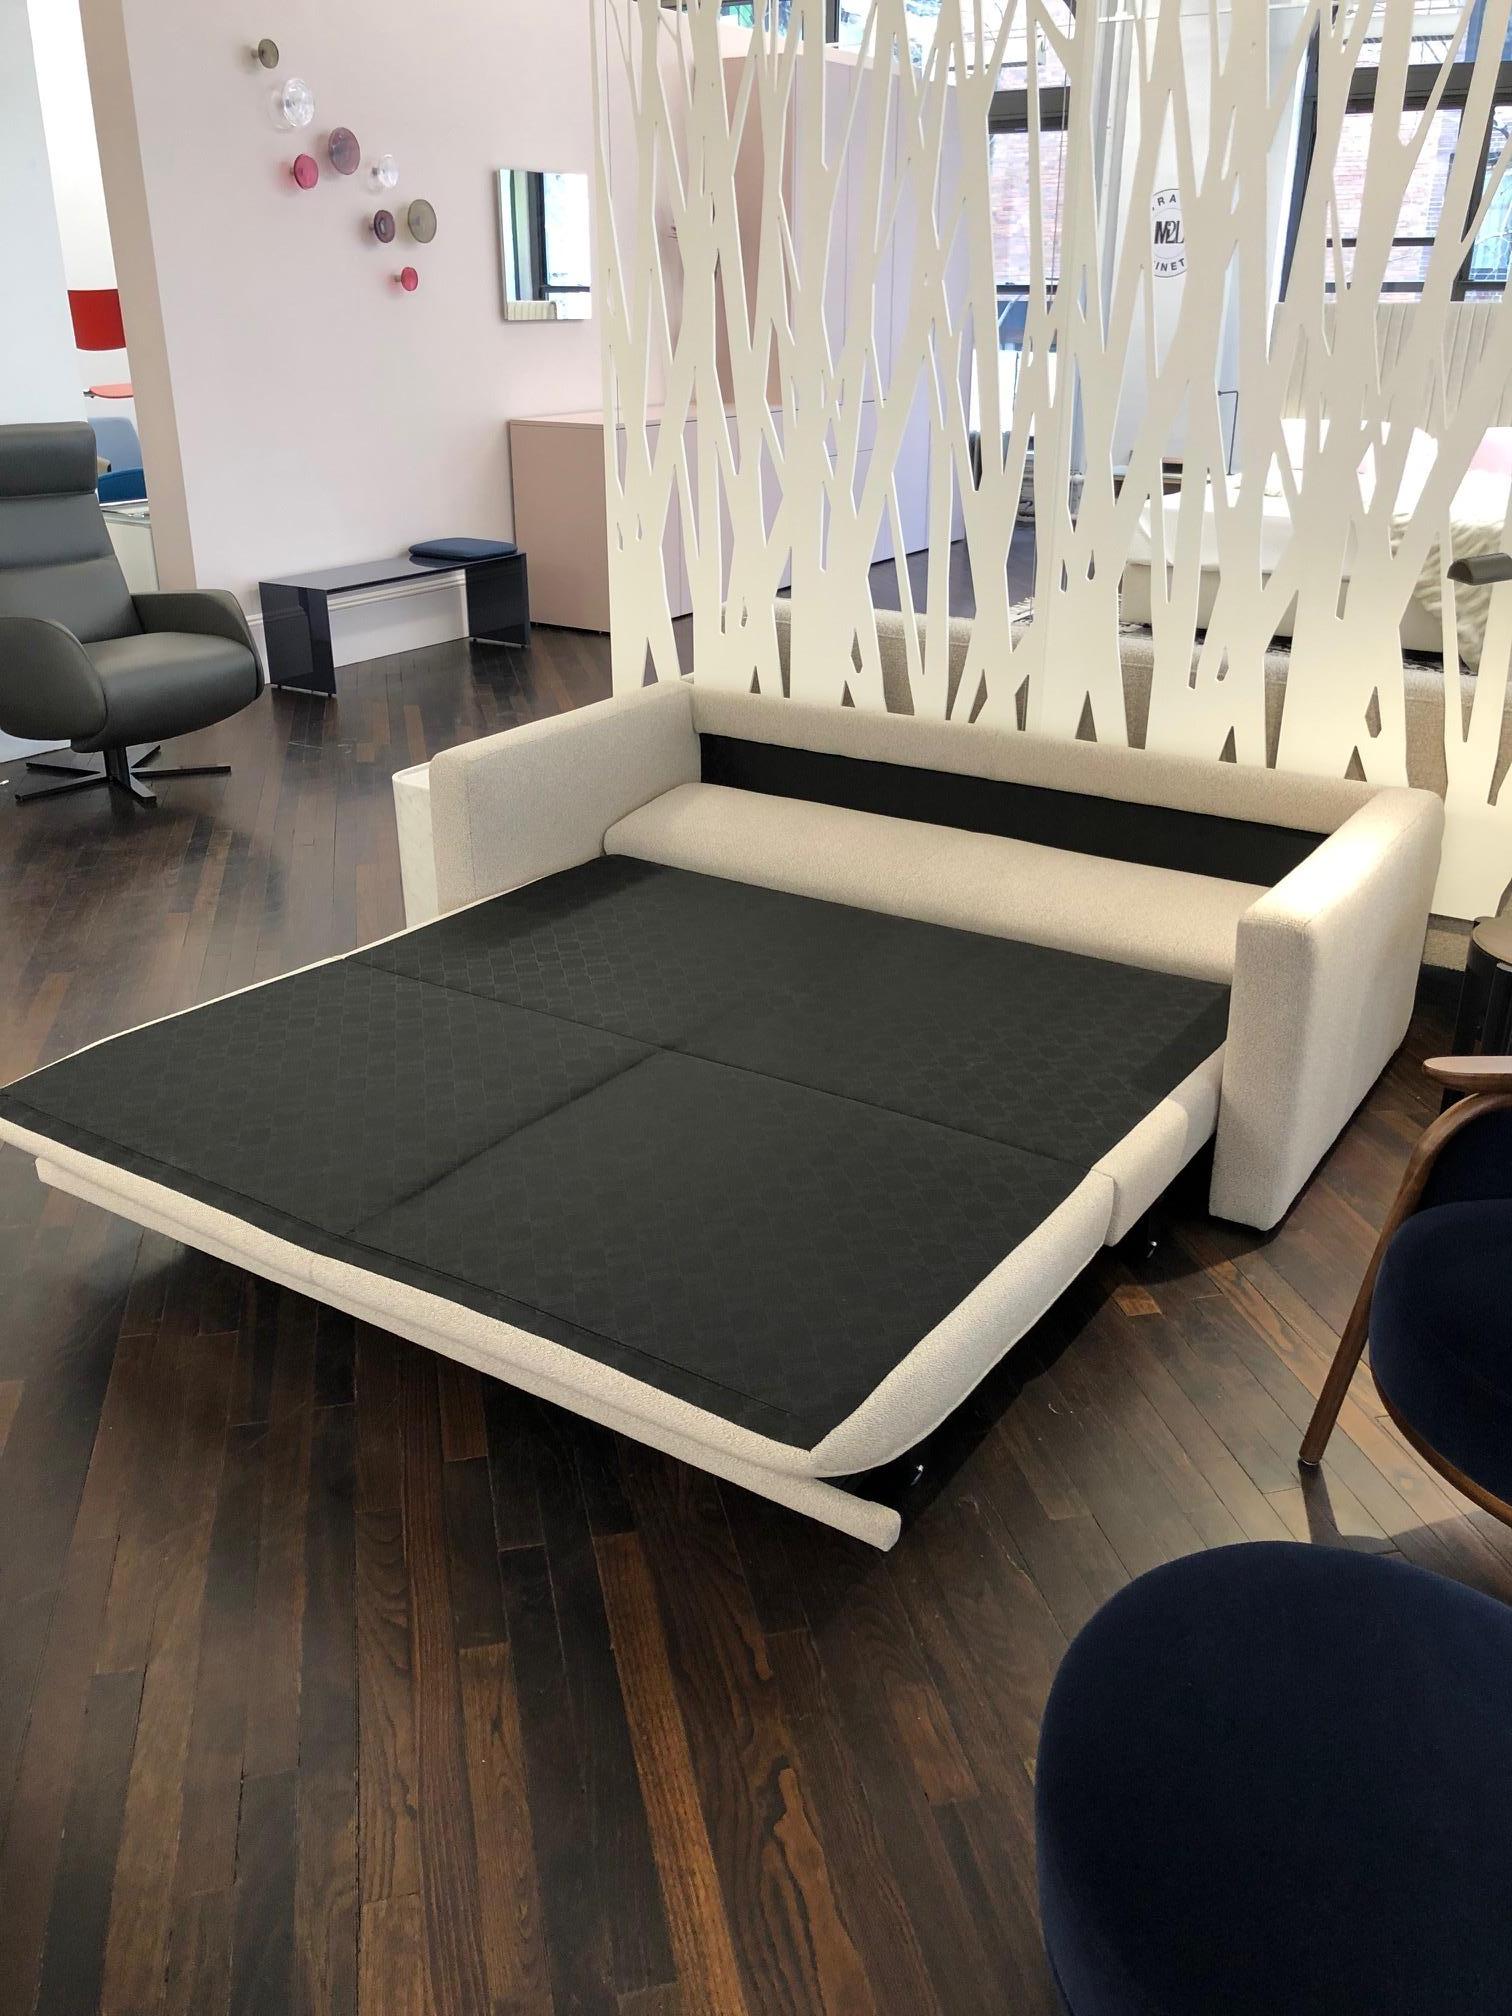 A true sofa, this model uses the well-tried pull-out mechanism, developed and patented by Wittmann for the original Denise. With Denise 6000, Wittmann set out to develop a compact, tastefully understated sofa bed tailored to the constraints of